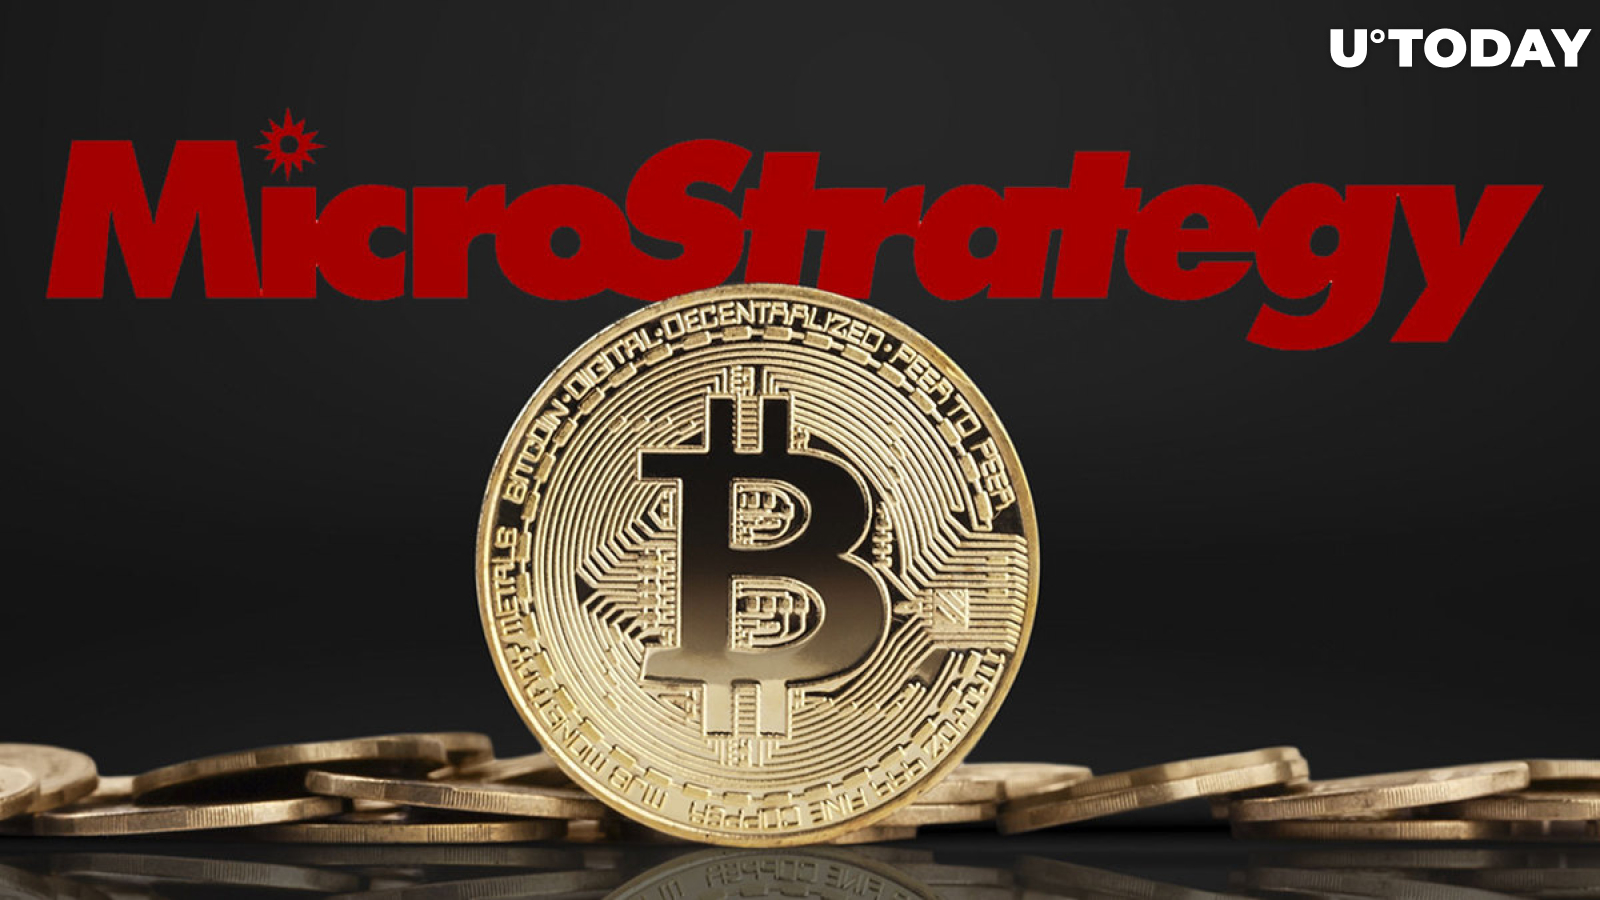 Massive Bitcoin (BTC) Purchase Announced by MicroStrategy